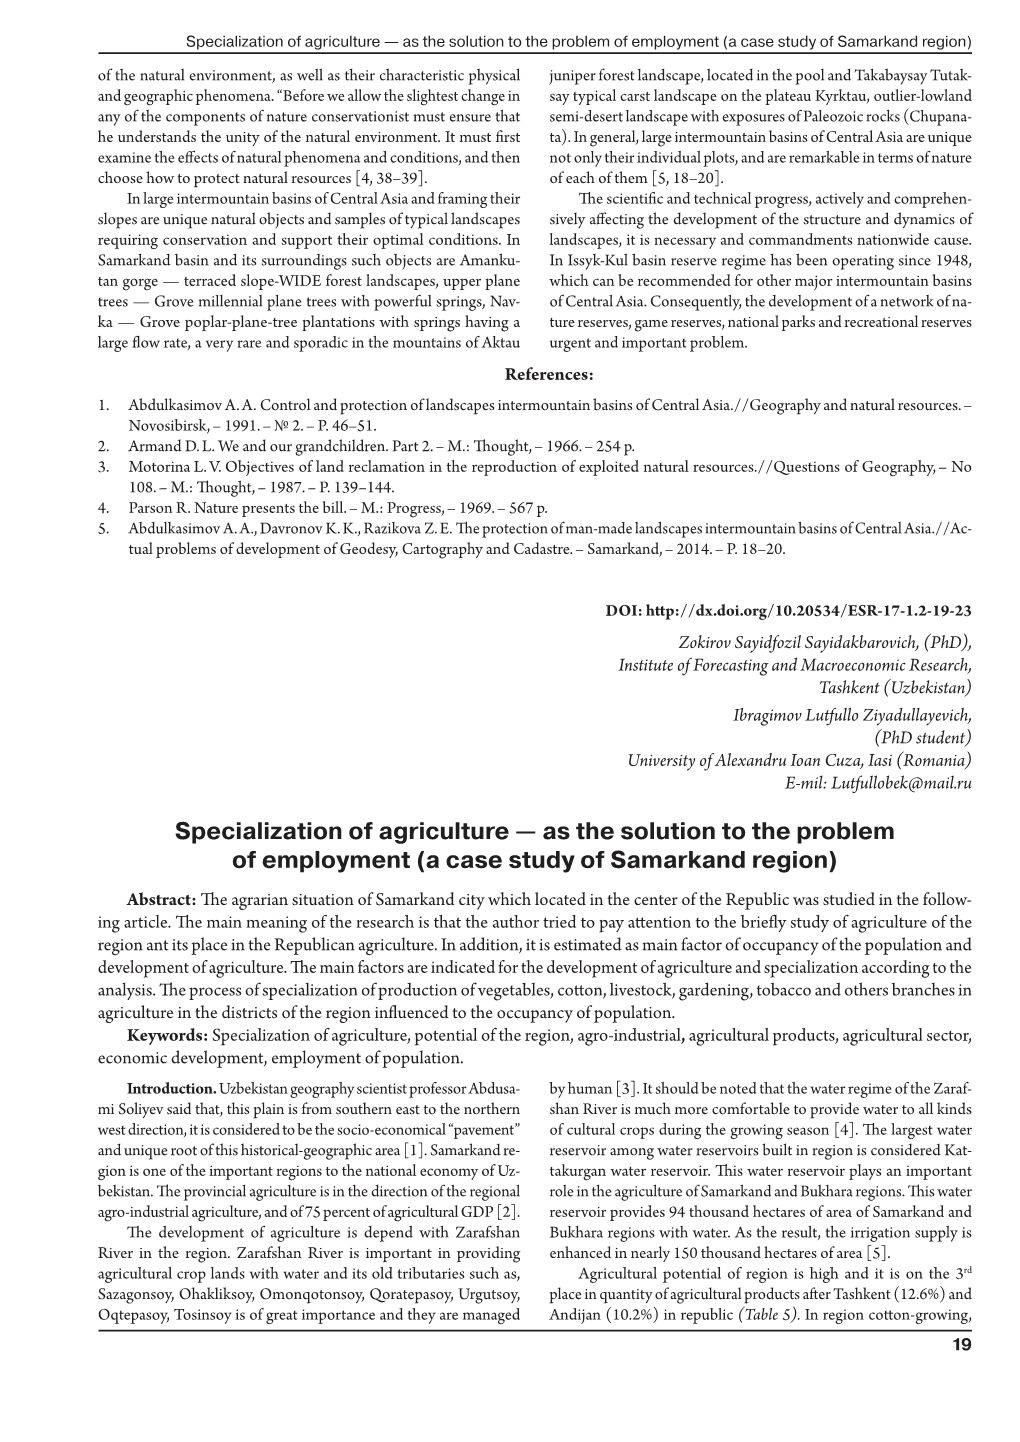 Specialization of Agriculture — As the Solution to the Problem Of